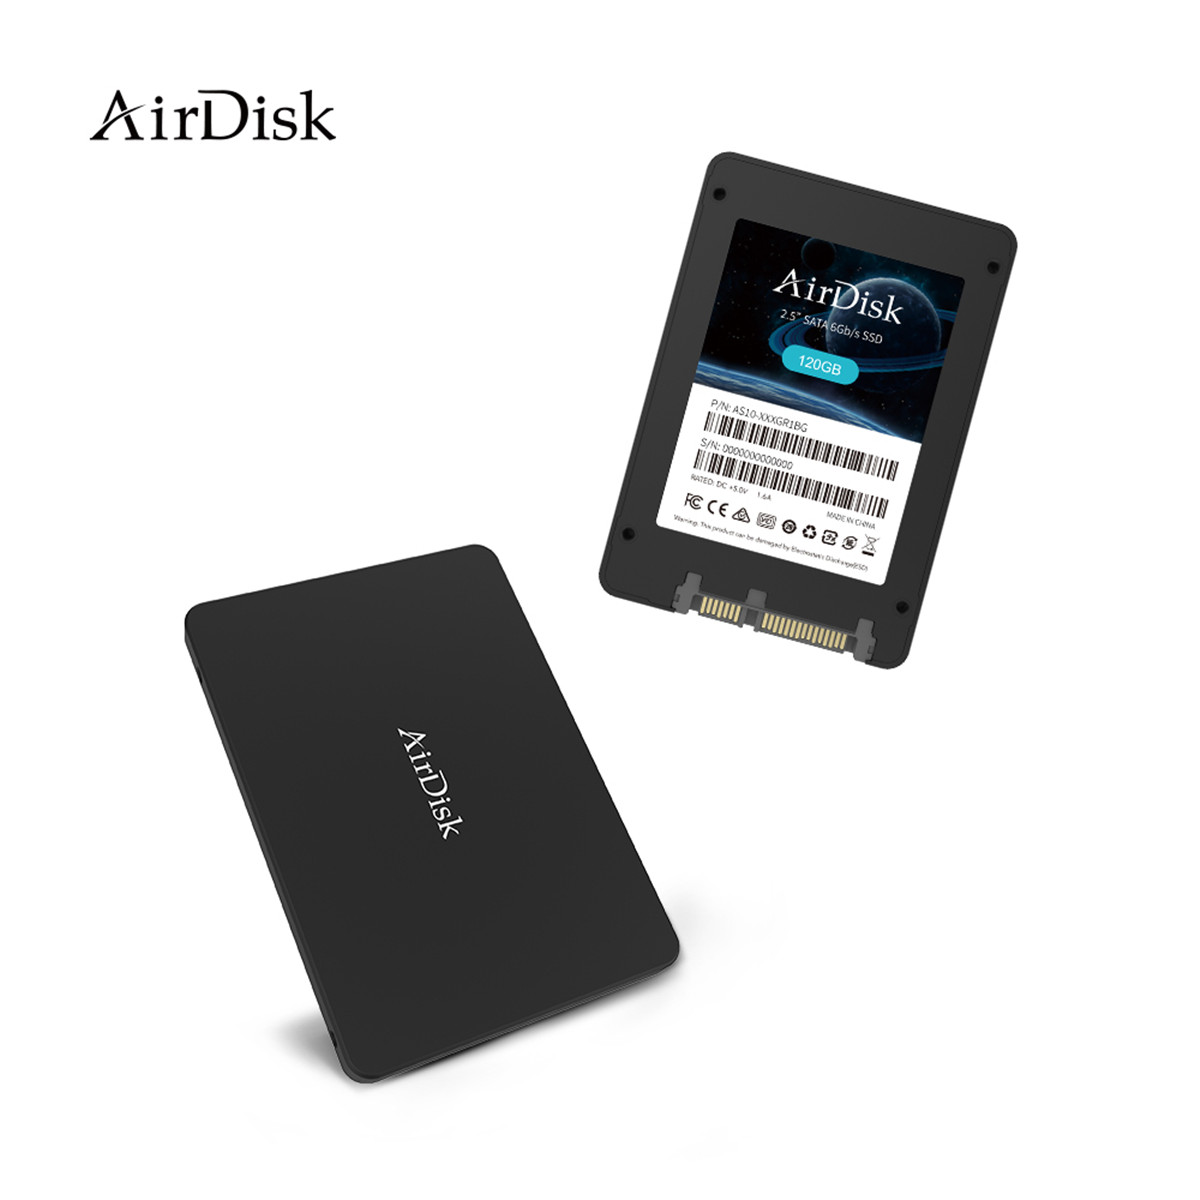 Airdisk 120GB S10 SATA 3 2.5" Internal SSD - 2 years warranty, Up to 550MB/s read, Black, local PH release, AS10X-120GB1G